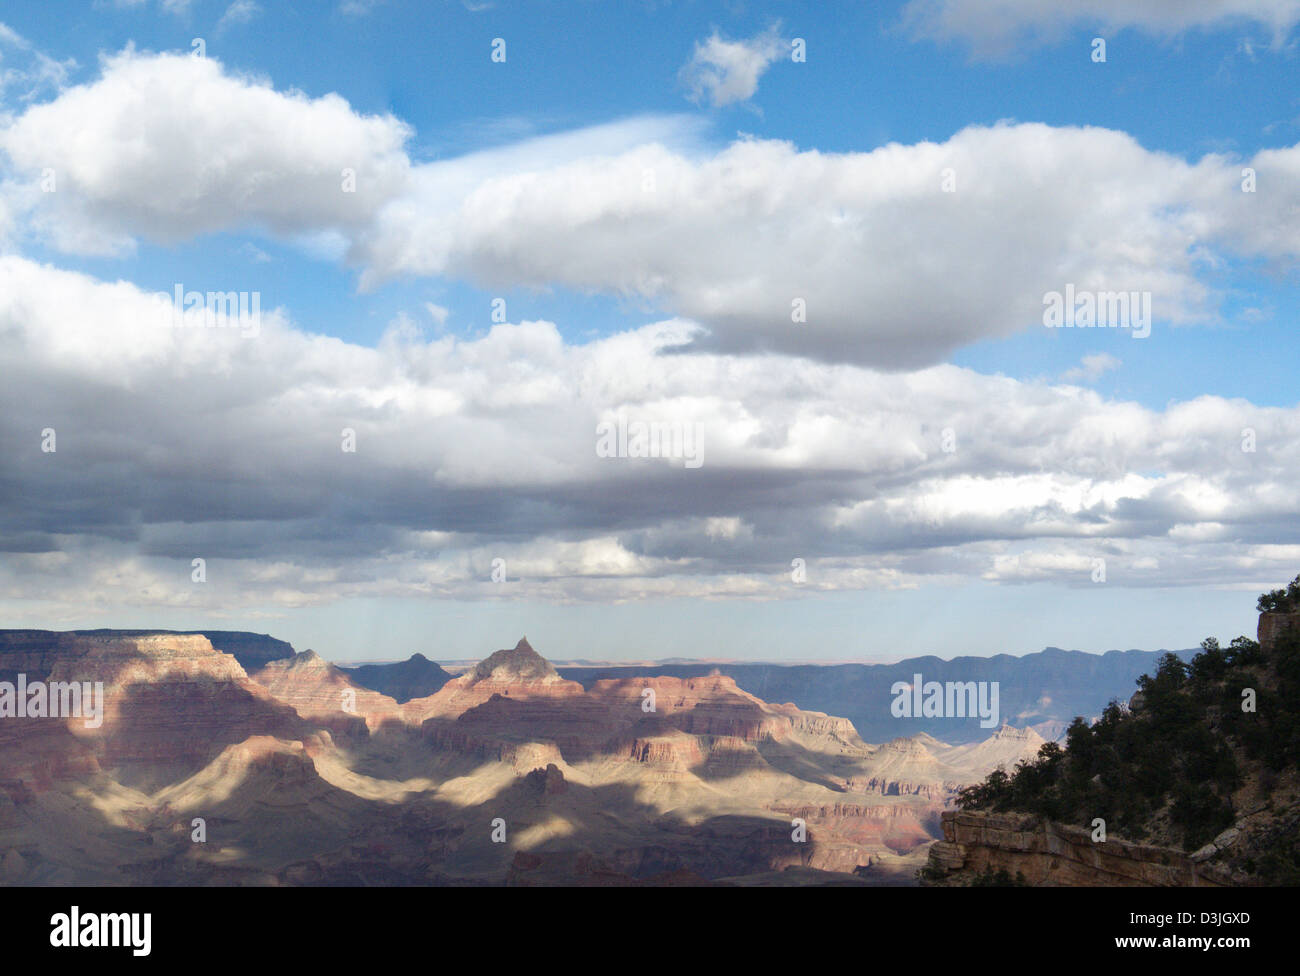 Dec. 2012: Grand Canyon National Park: Storm Approaching 2065 Stock Photo